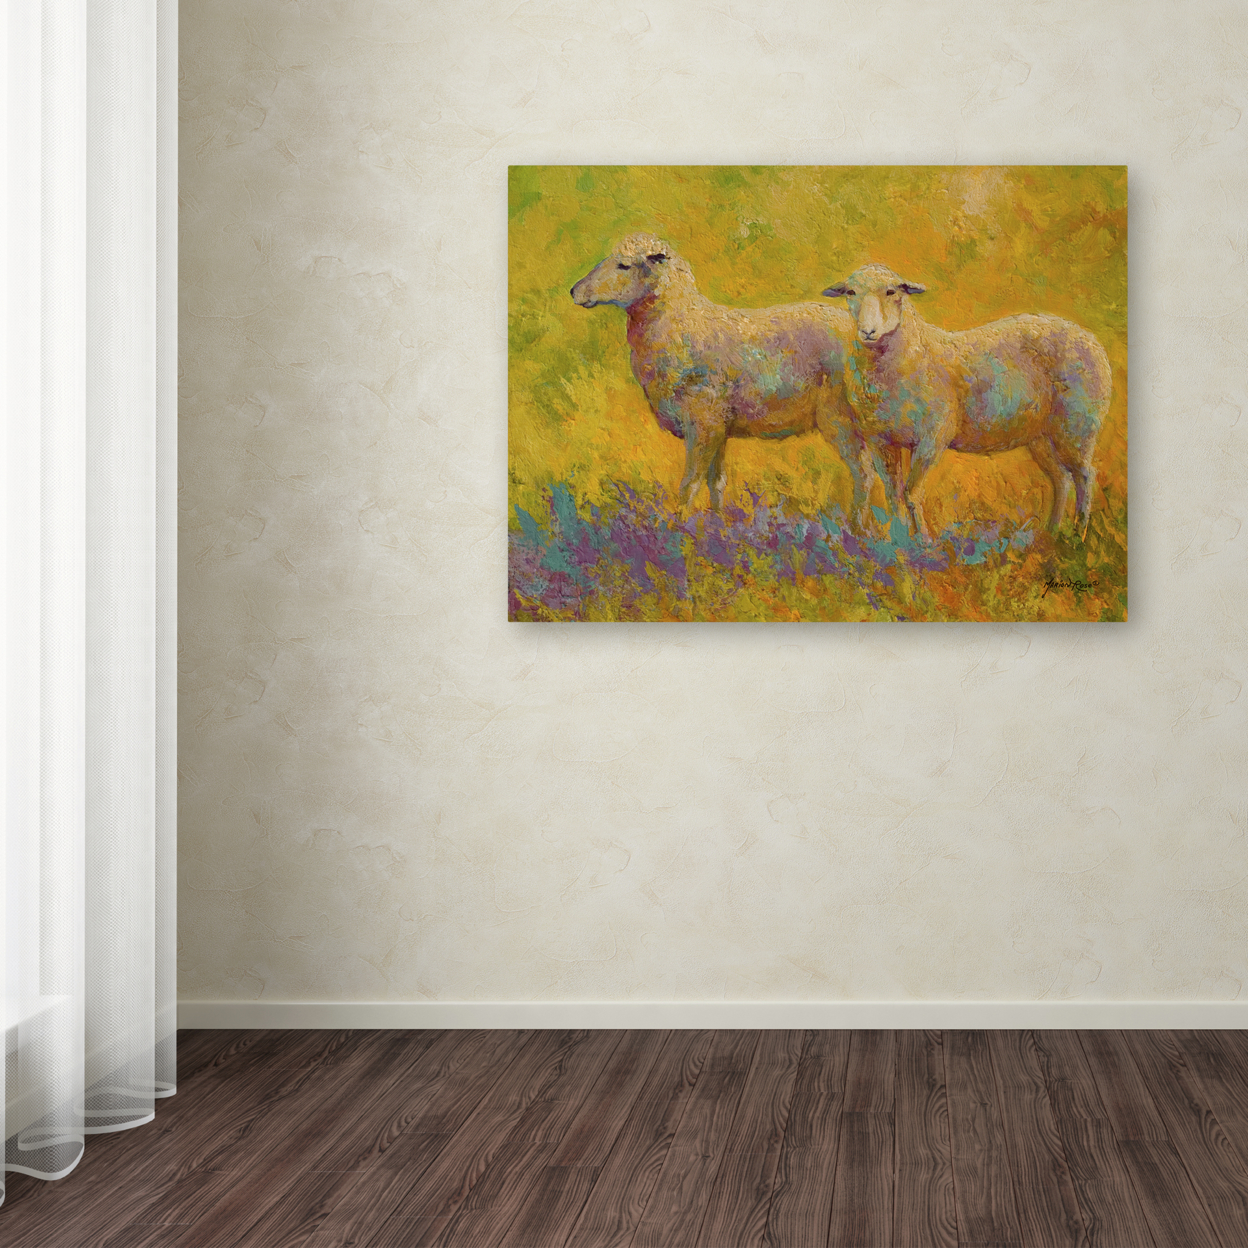 Marion Rose 'Warm Glow Sheep Pair' Ready To Hang Canvas Art 18 X 24 Inches Made In USA